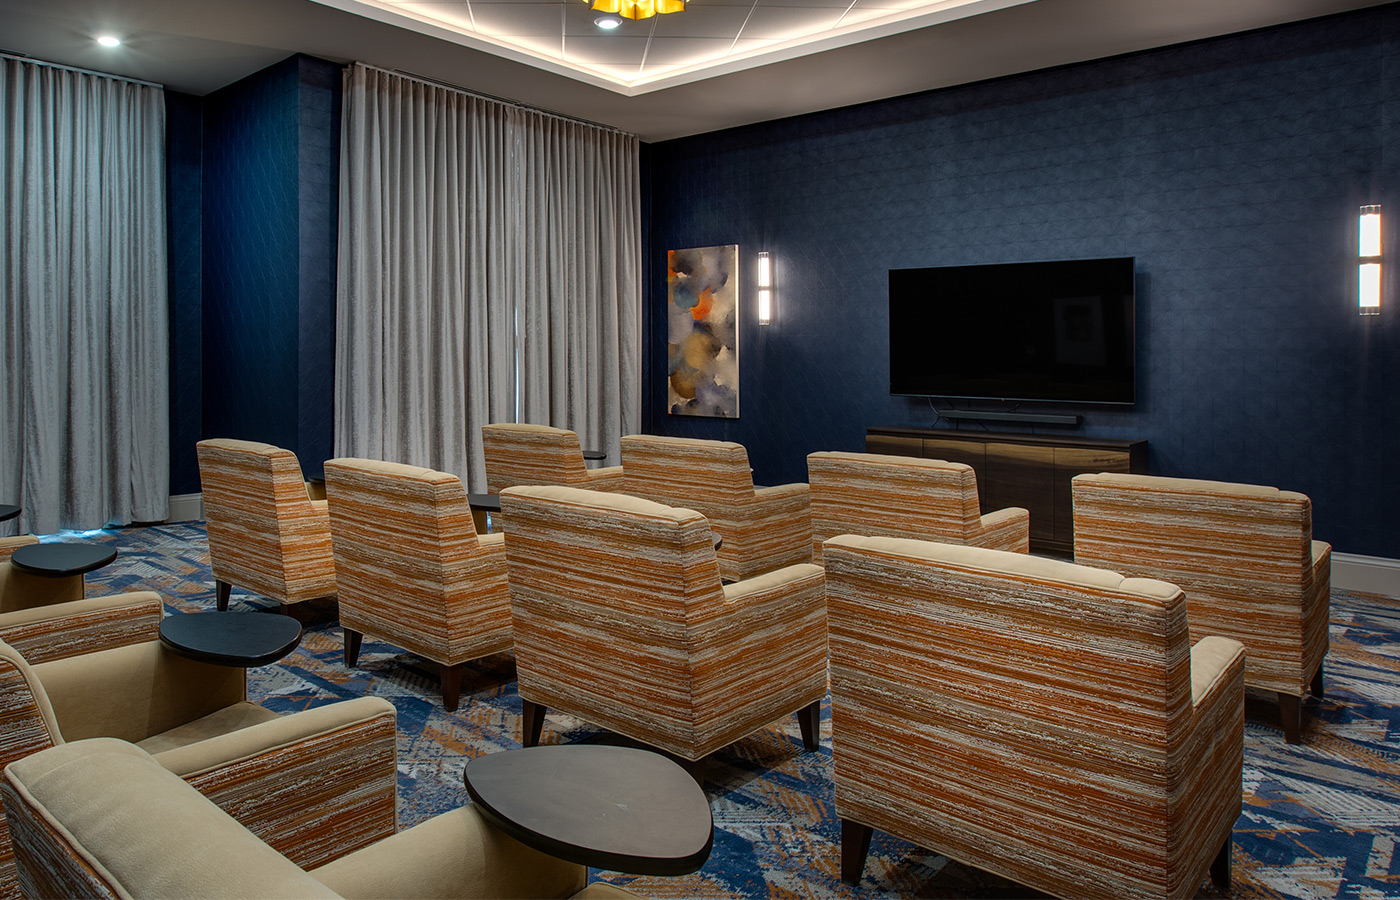 A theater room with big comfy seating and a large screen.